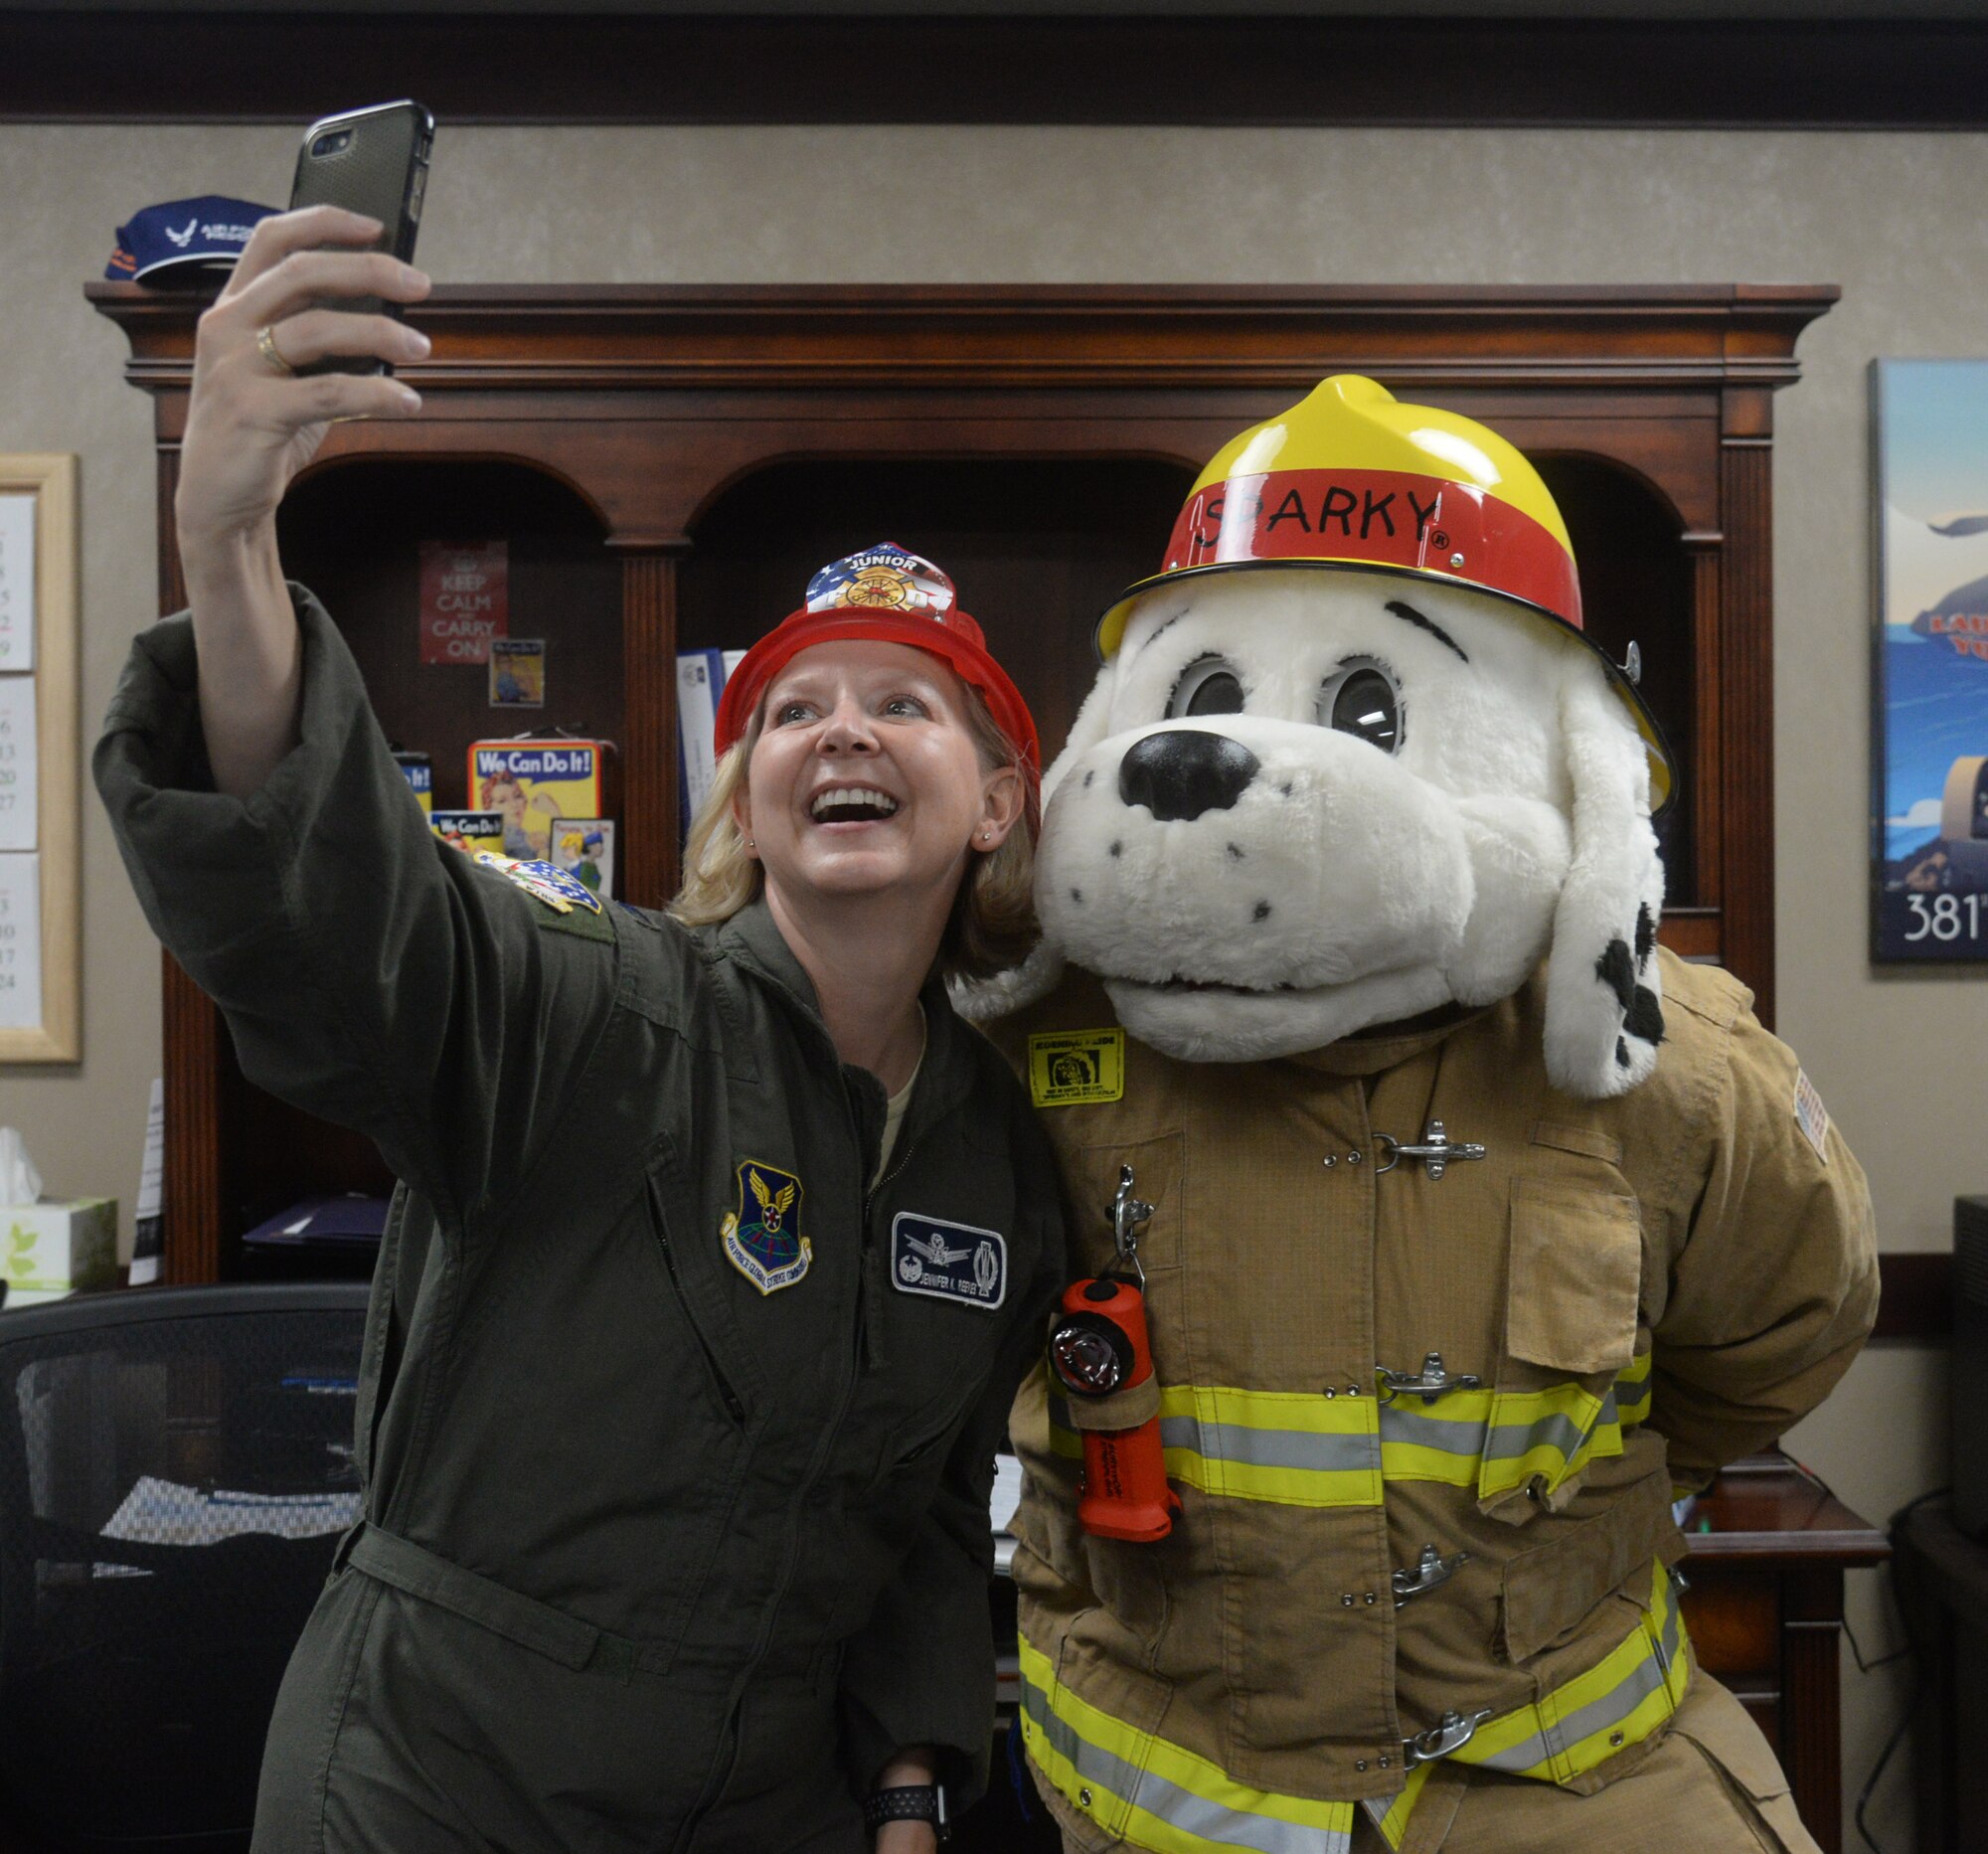 From left to right – Lt. Col. Alex Mignery, 341st Civil Engineer Squadron commander; Col. Jennifer Reeves, 341st Missile Wing commander; Sparky the Fire Dog; Rickey Naccarato, 341st CES assistant fire chief; Chief Master Sergeant Eryn McElroy, 341st MW command chief; and Michael Johns, 341st CES fire inspector, officially recognize Fire Prevention Week as Oct. 7-13 at Malmstrom Air Force Base, Mont., with a signing of a proclamation Sept. 26, 2018. (U.S. Air Force photo by Airman 1st Class Tristan Truesdell)